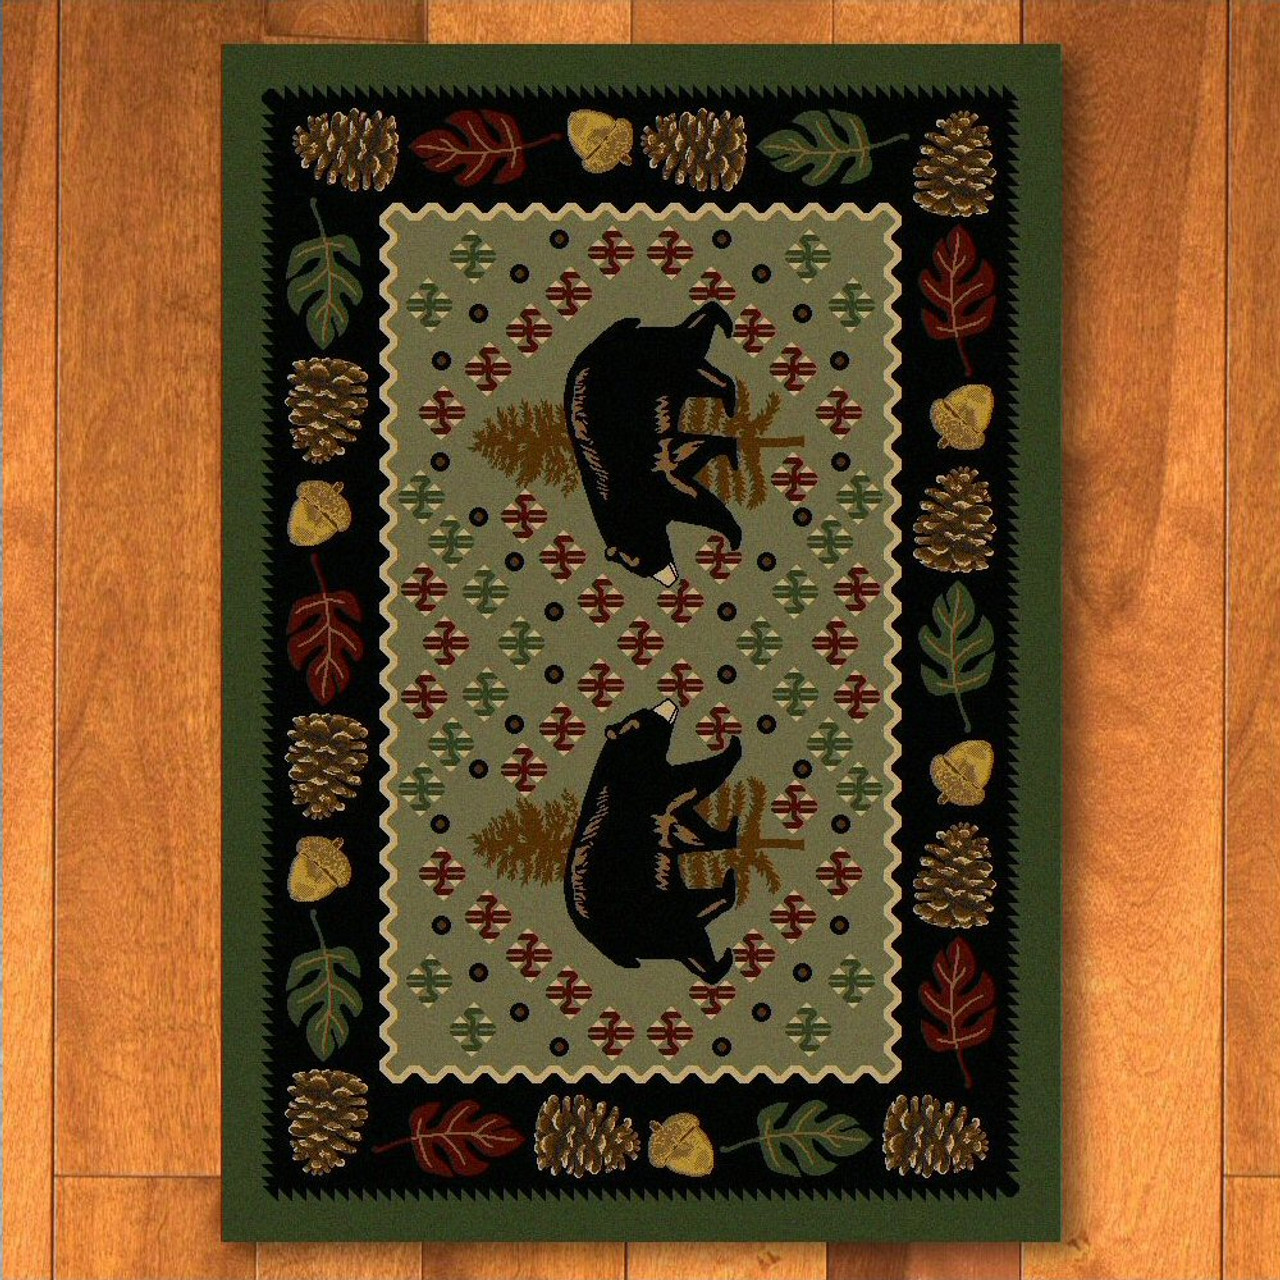 https://cdn11.bigcommerce.com/s-oo0gdojvjo/images/stencil/1280x1280/products/2550/4734/0138grn234-3-x-4-patchwork-bear-and-pinecones-green-wildlife-rectangle-scatter-rug-american-dakota__21436.1536822384.jpg?c=2&imbypass=on